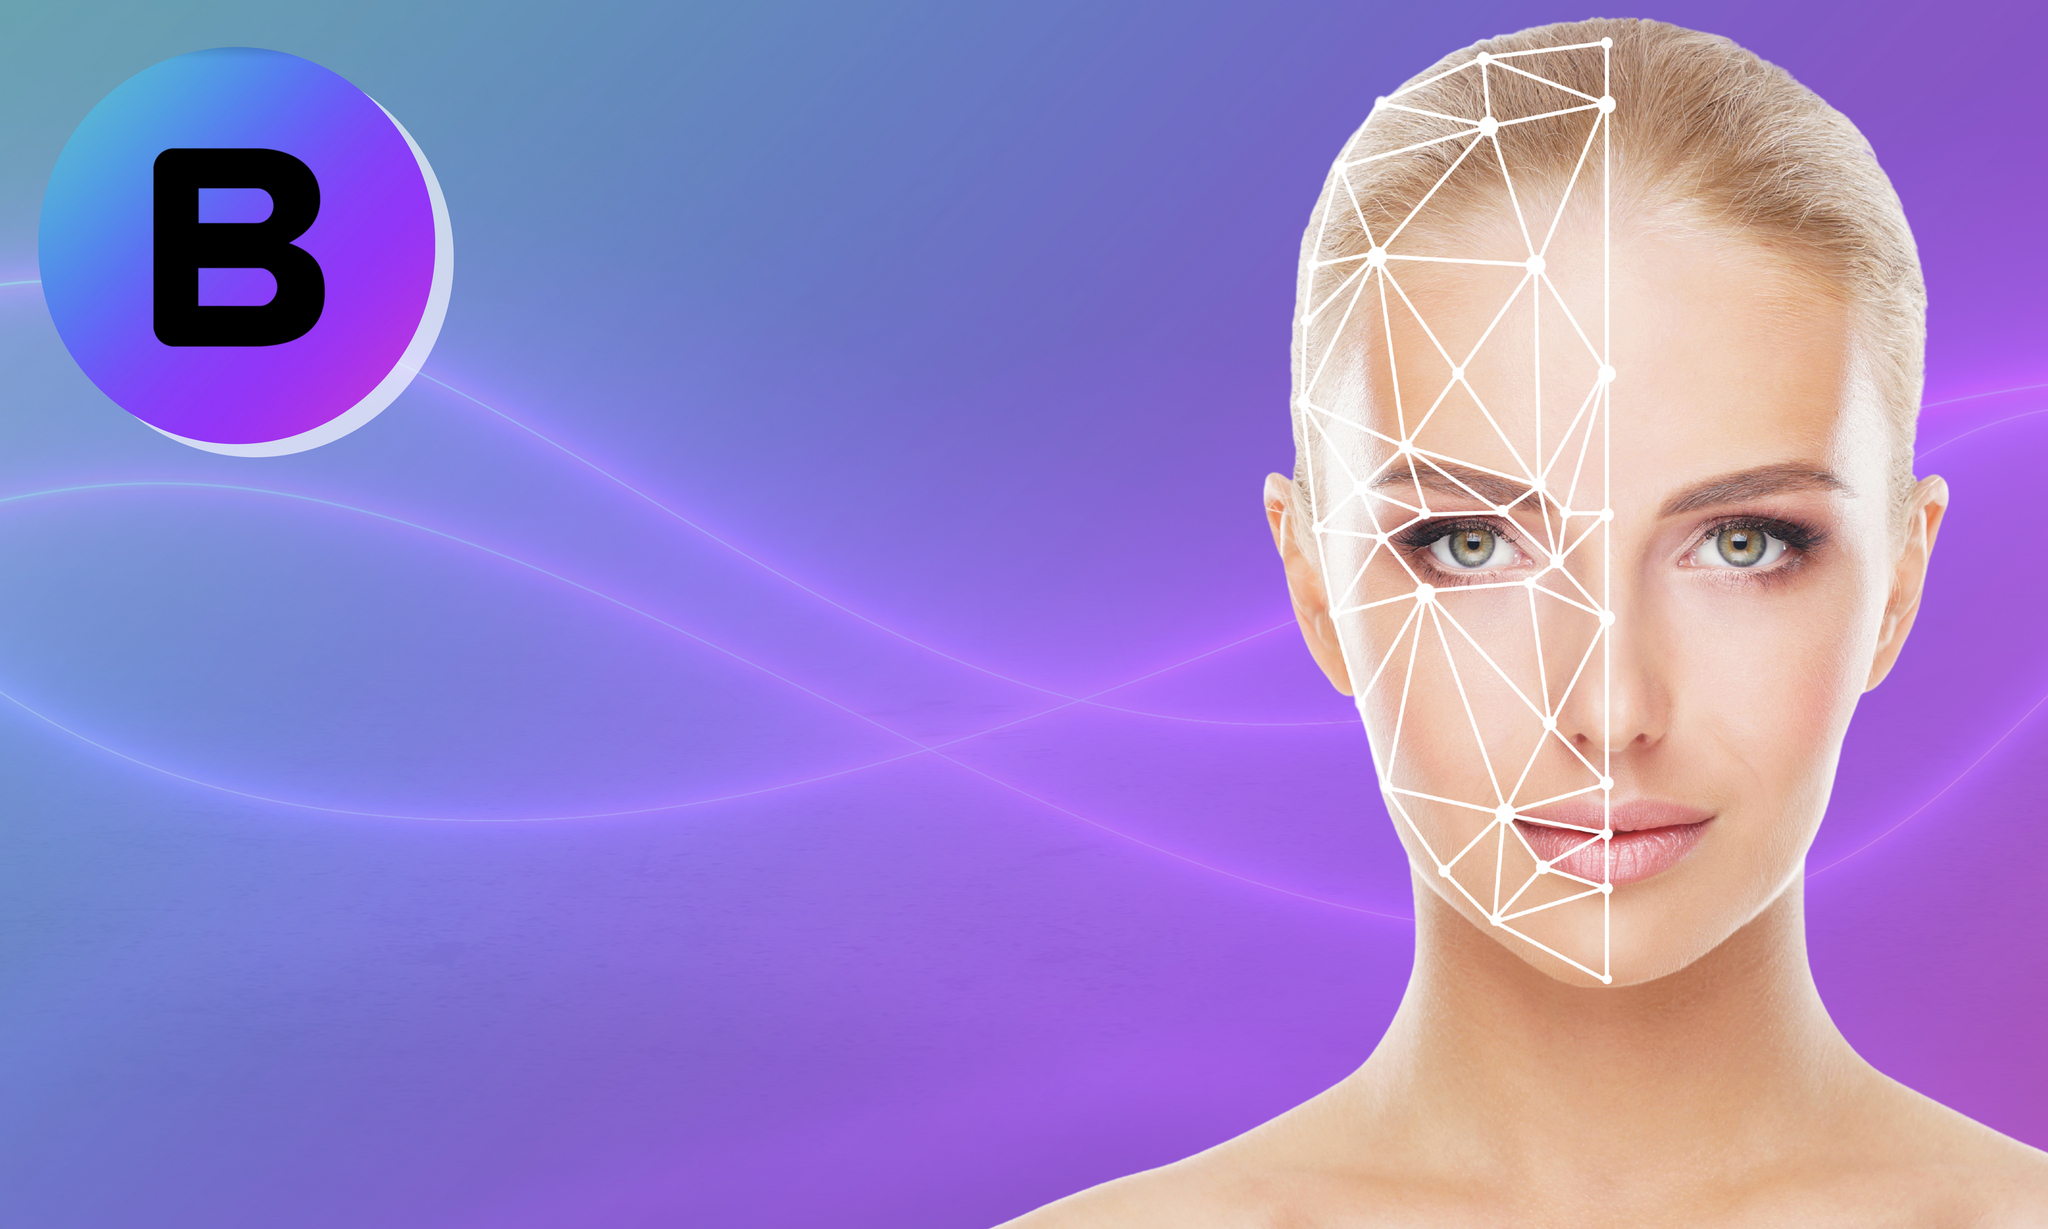 Meet the NEW You With Our First Ever Medically Accurate Aesthetics Simulation